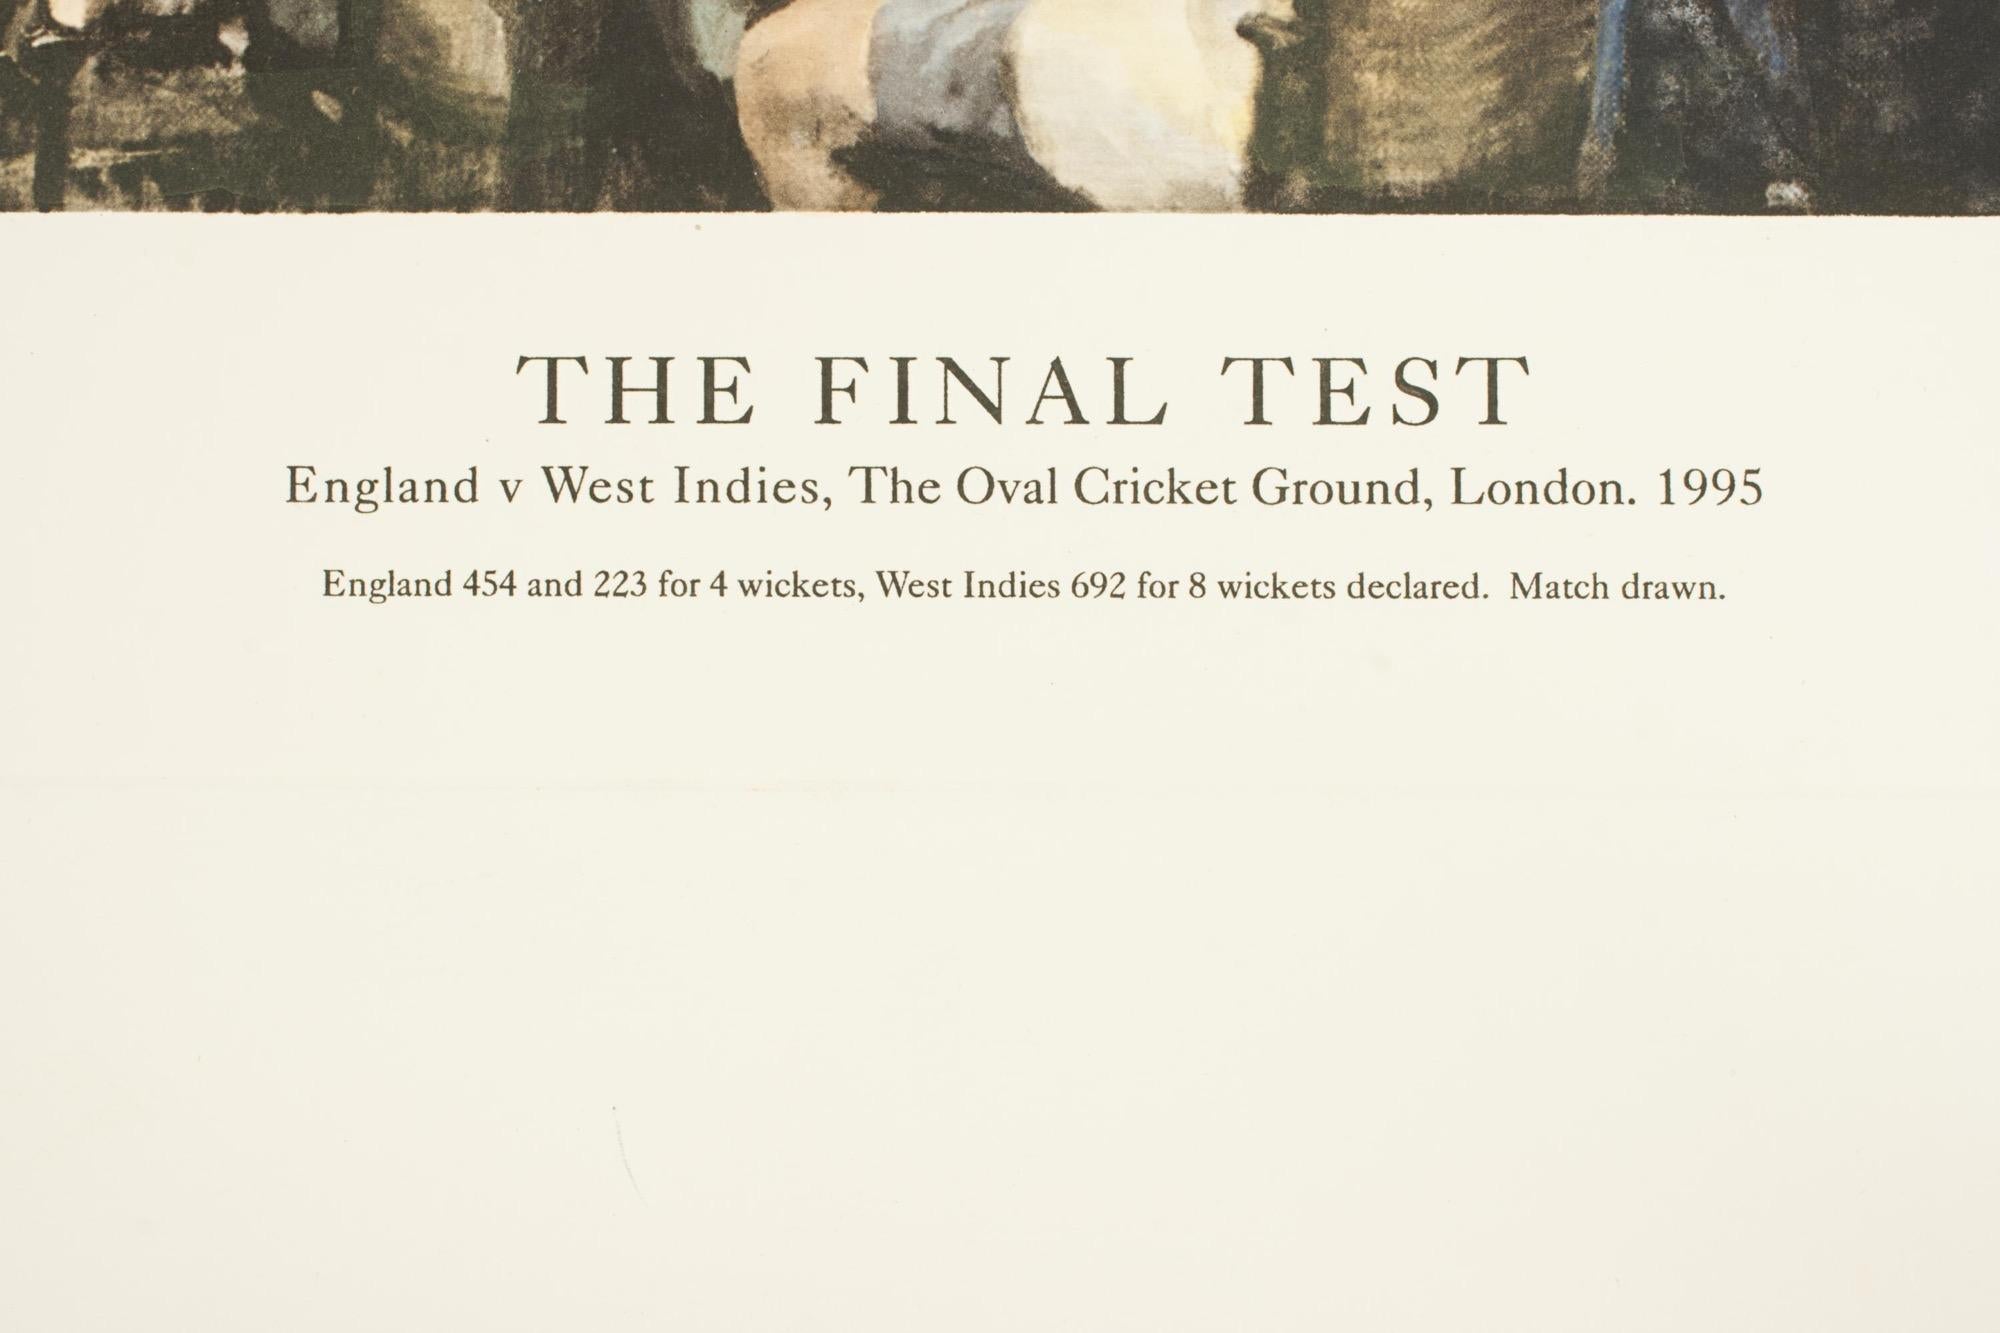 Cricket Print, England v. West Indies at the Oval, by Arthur Weaver For Sale 2